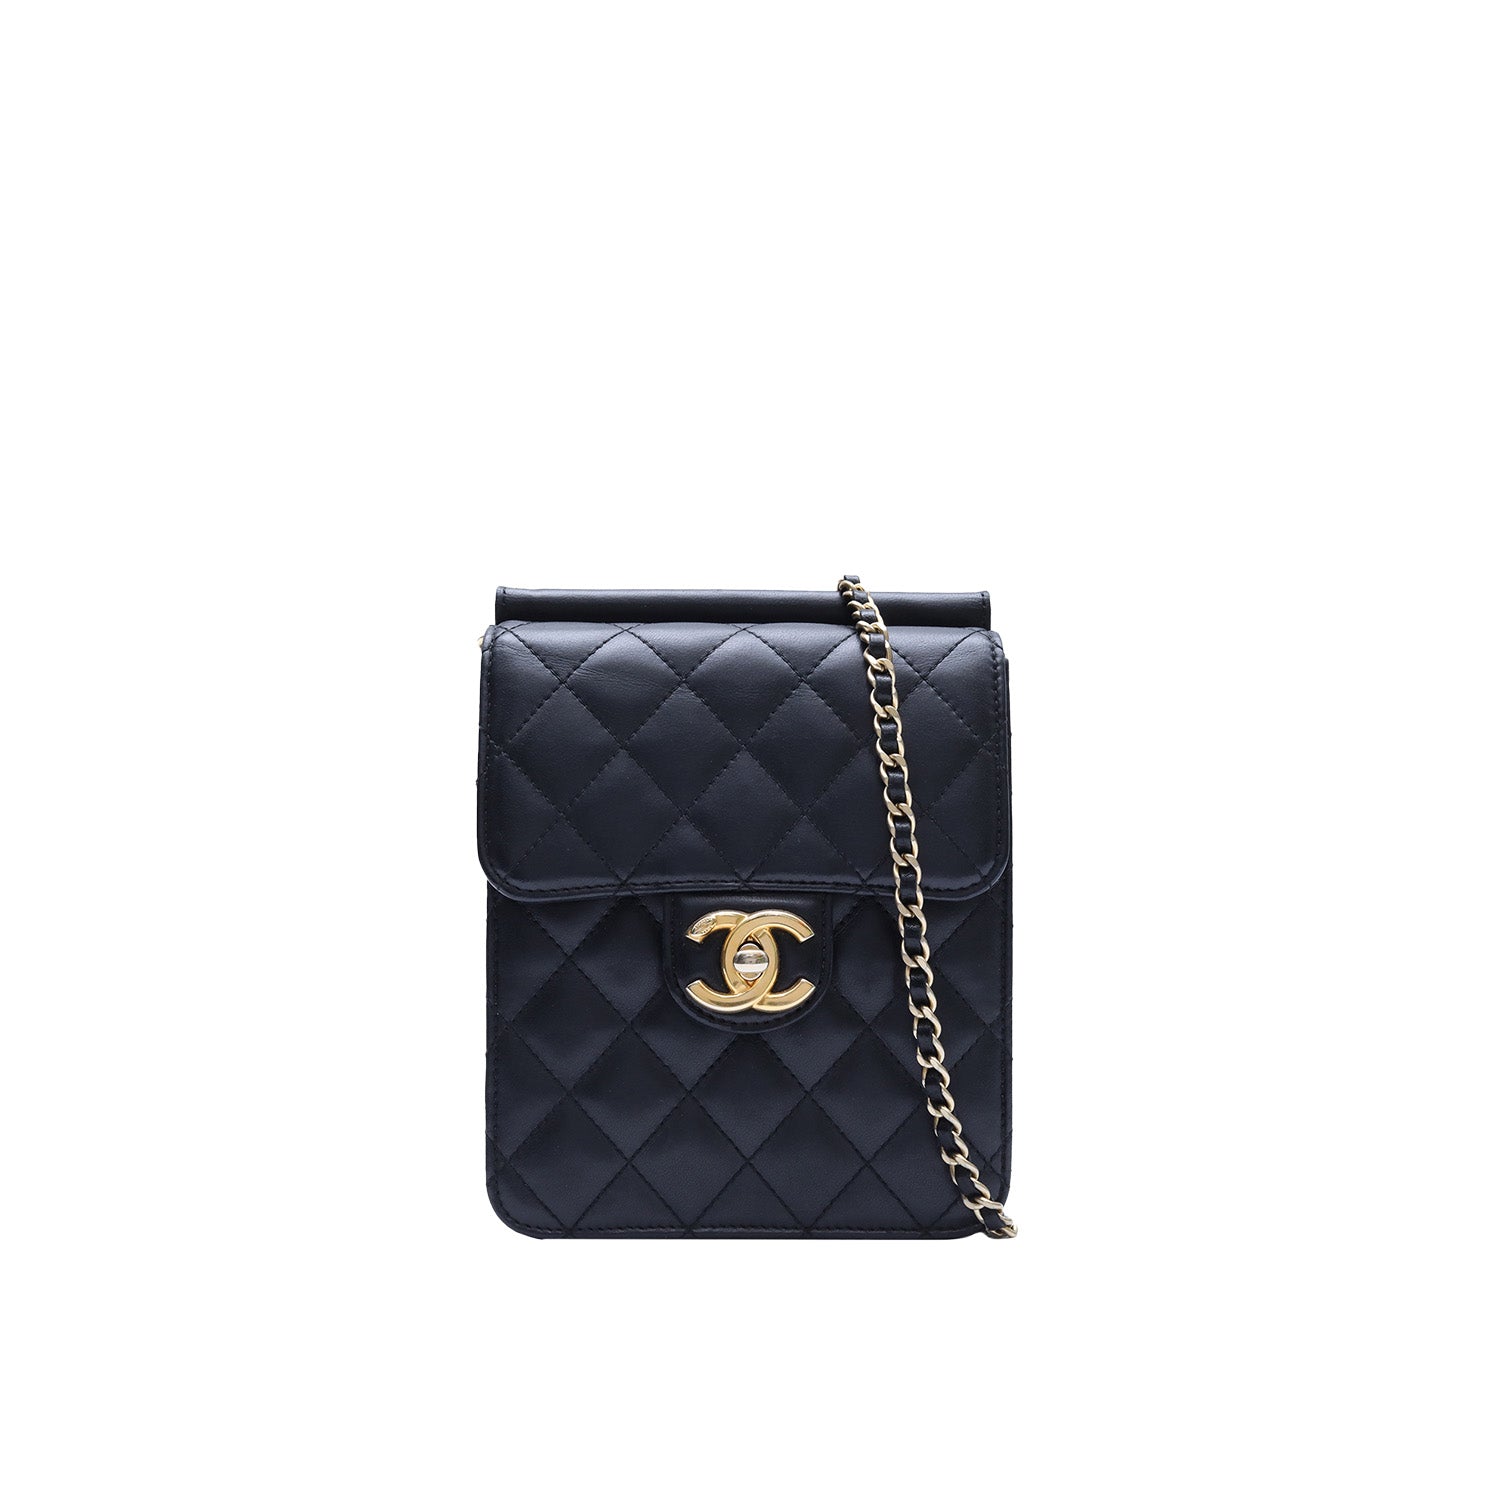 Chanel Quilted Black Vertical Phone Clutch Lambskin Gold CC Logo